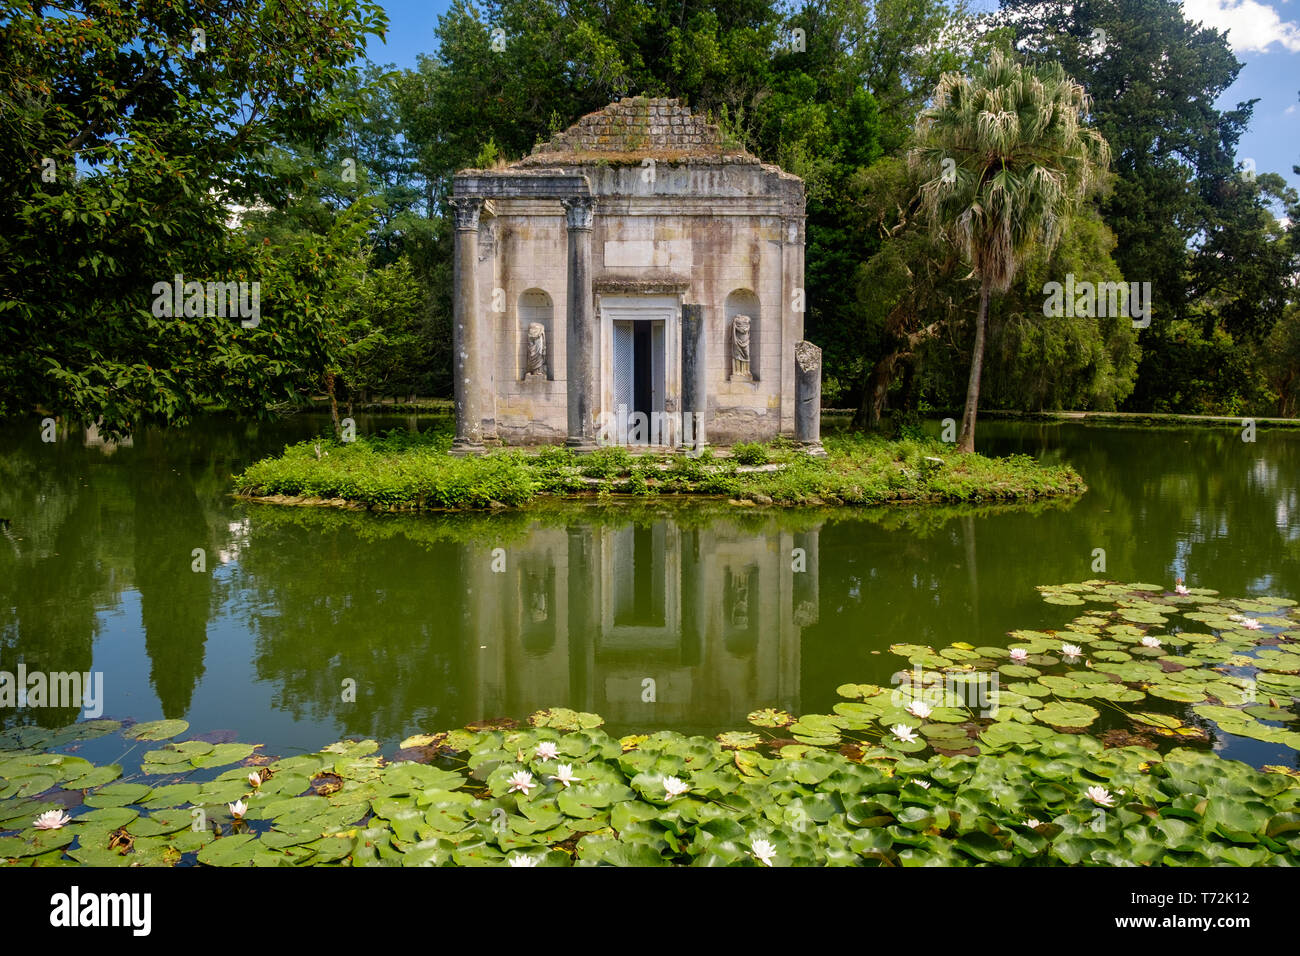 The English garden of the 'Reggia di Caserta' has a few fake ruins, like this temple ruin on a small island in the middle of a pond with lilies. Stock Photo